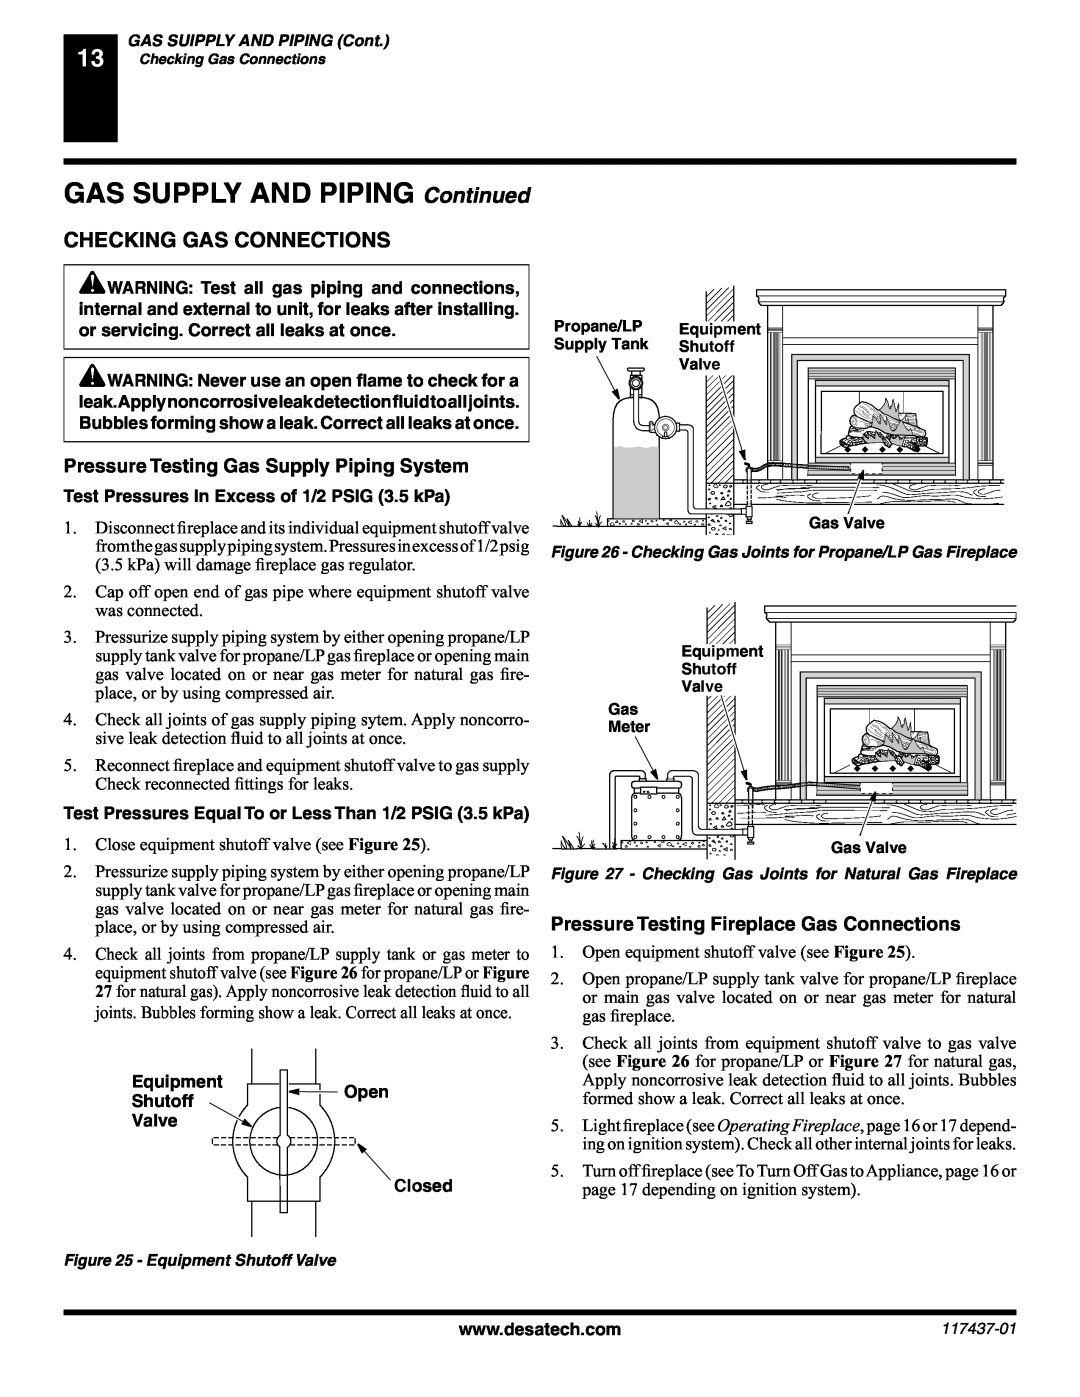 Desa (V) CB36(N Checking Gas Connections, GAS SUPPLY AND PIPING Continued, Test Pressures In Excess of 1/2 PSIG 3.5 kPa 